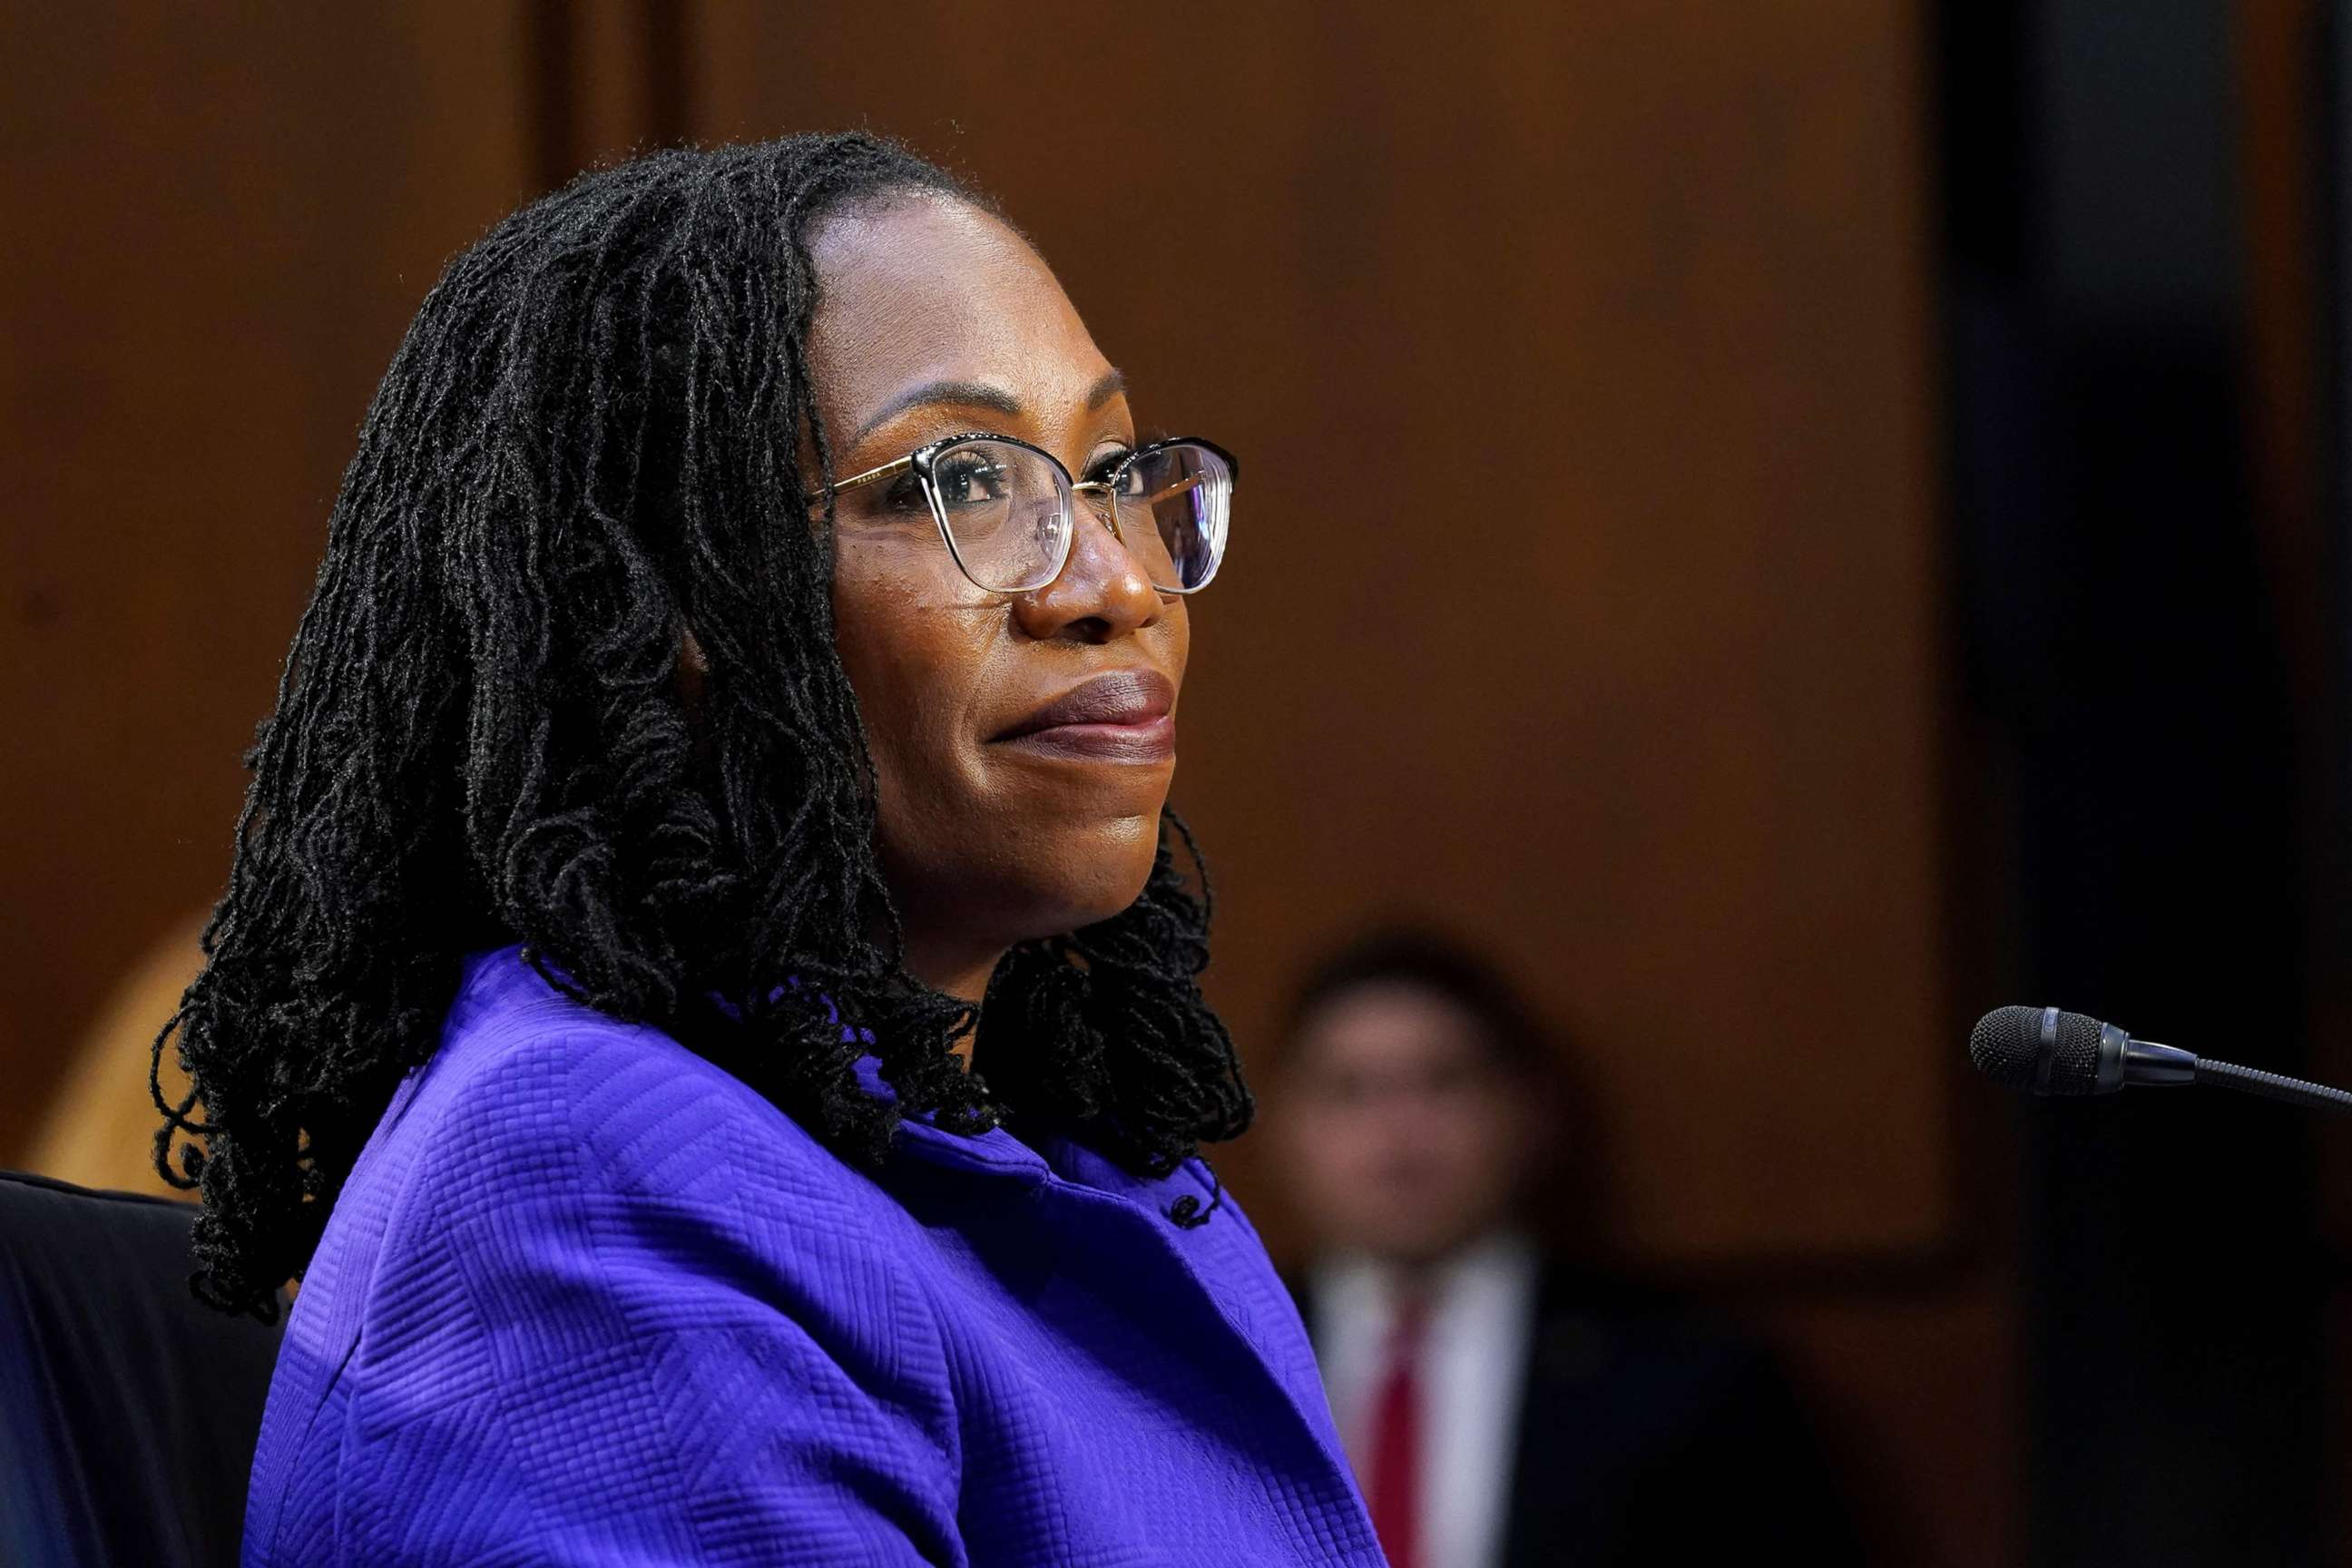 PHOTO: Supreme Court nominee Ketanji Brown Jackson listens during her Senate Judiciary Committee confirmation hearing on Capitol Hill in Washington, D.C, March 21, 2022.